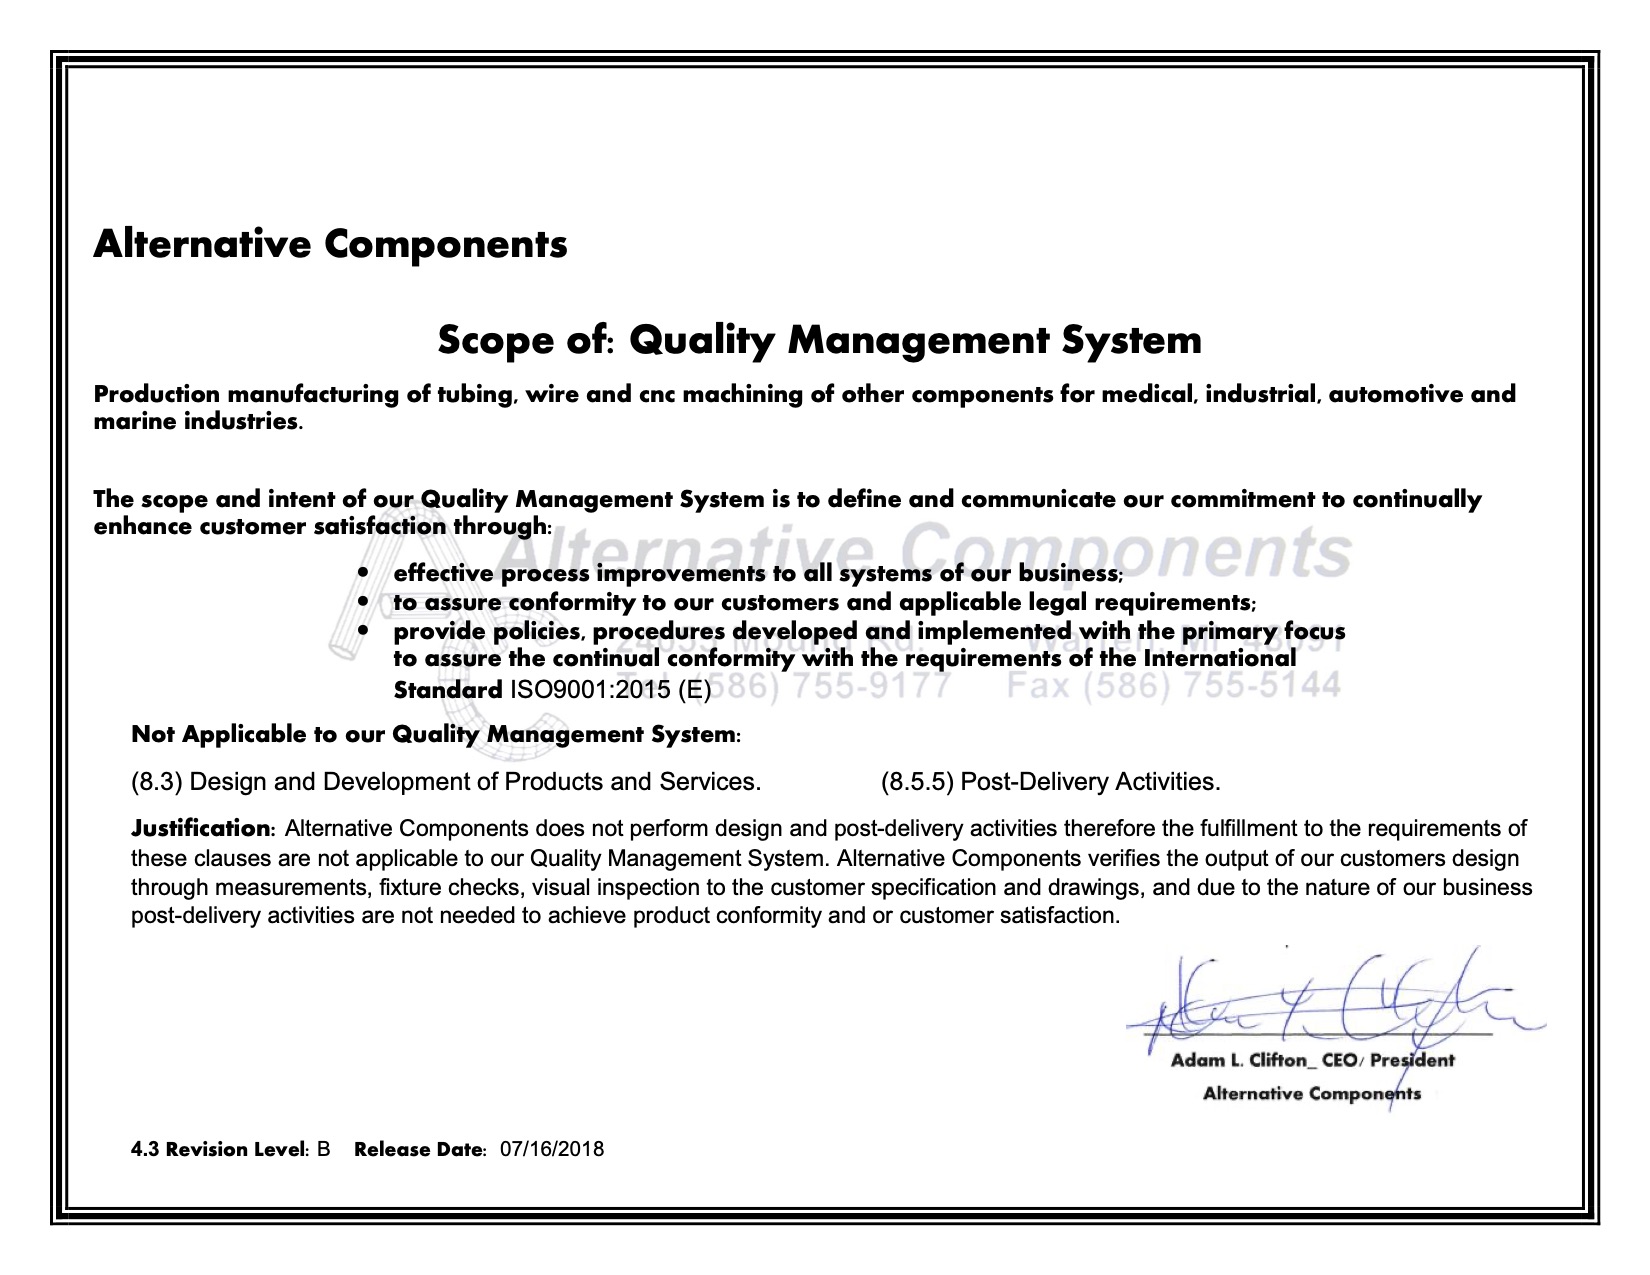 Scope of Quality Management System document